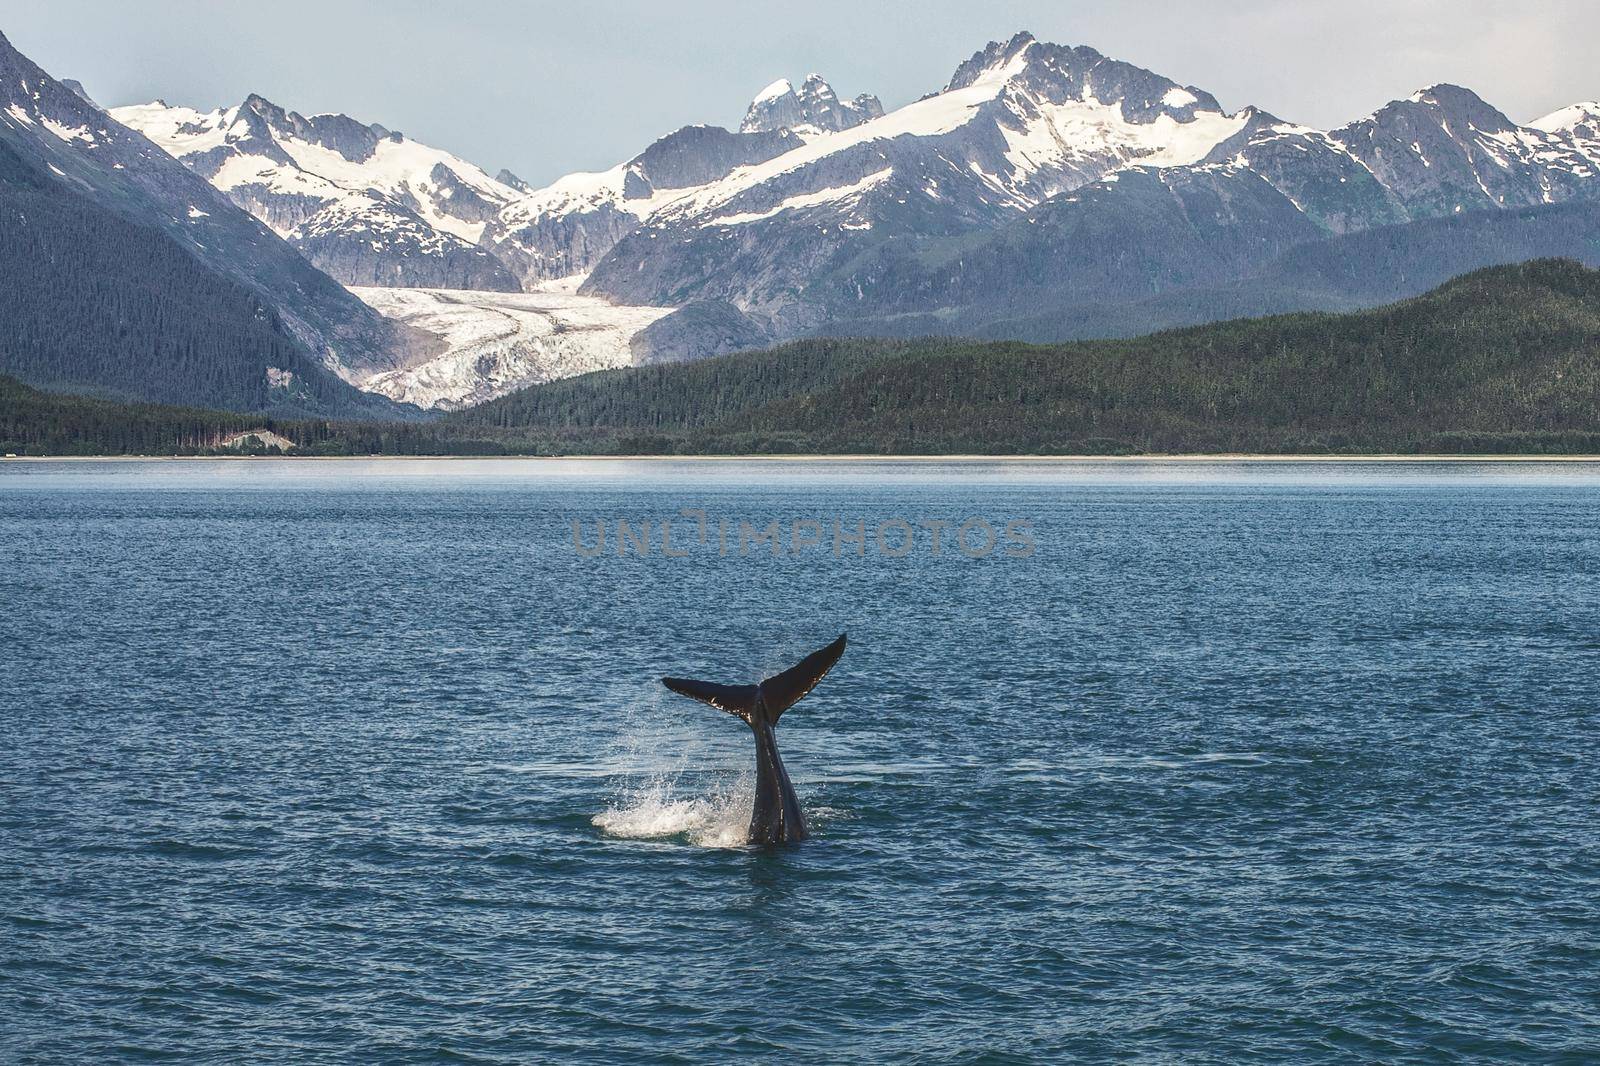 Baby Humpback Whale and Alaskan Landscape with Glacier in Background